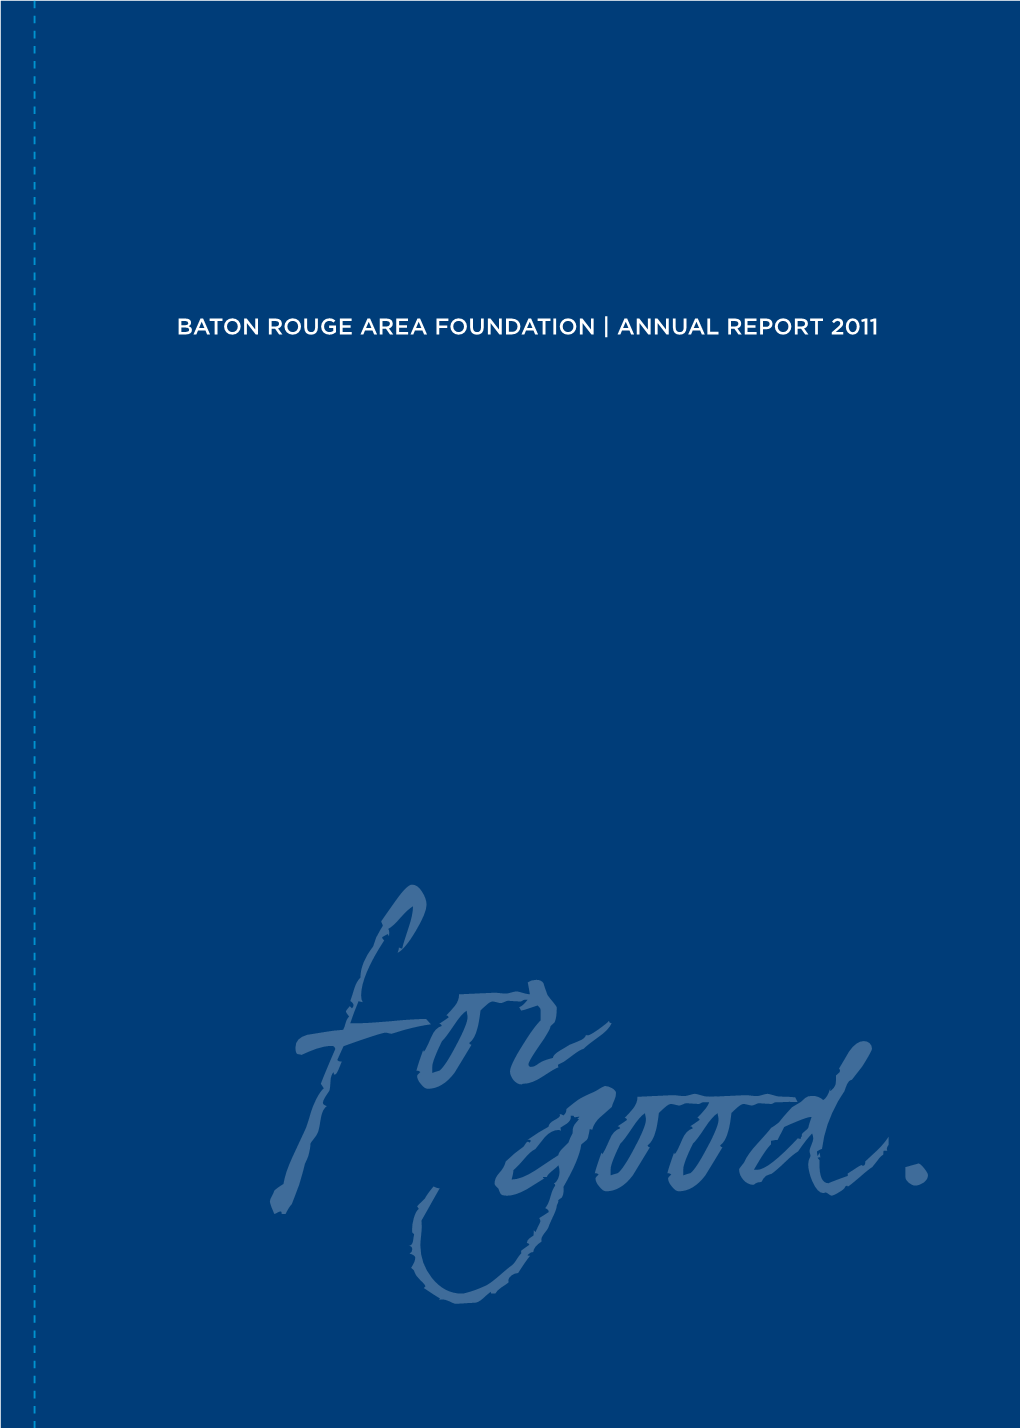 BATON ROUGE AREA FOUNDATION | Annual Report 2011 402 N